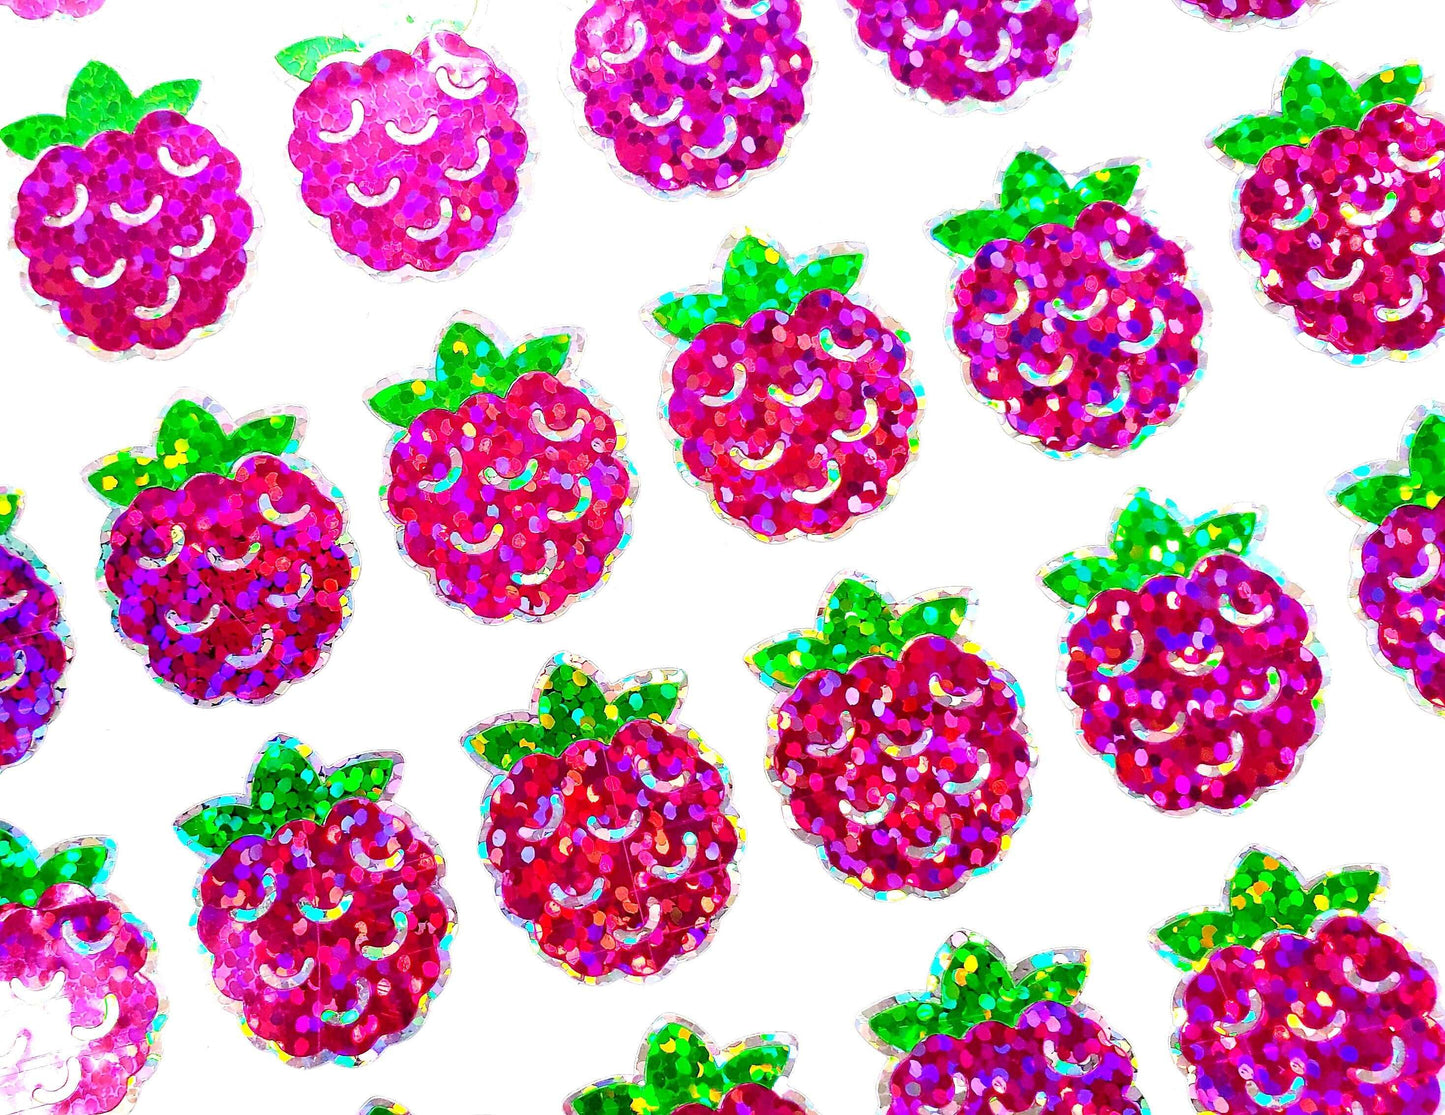 Raspberry Stickers, set of 12 or 24 pink and green summer fruit stickers for envelopes, cards, notebooks, drink cups and craft projects.